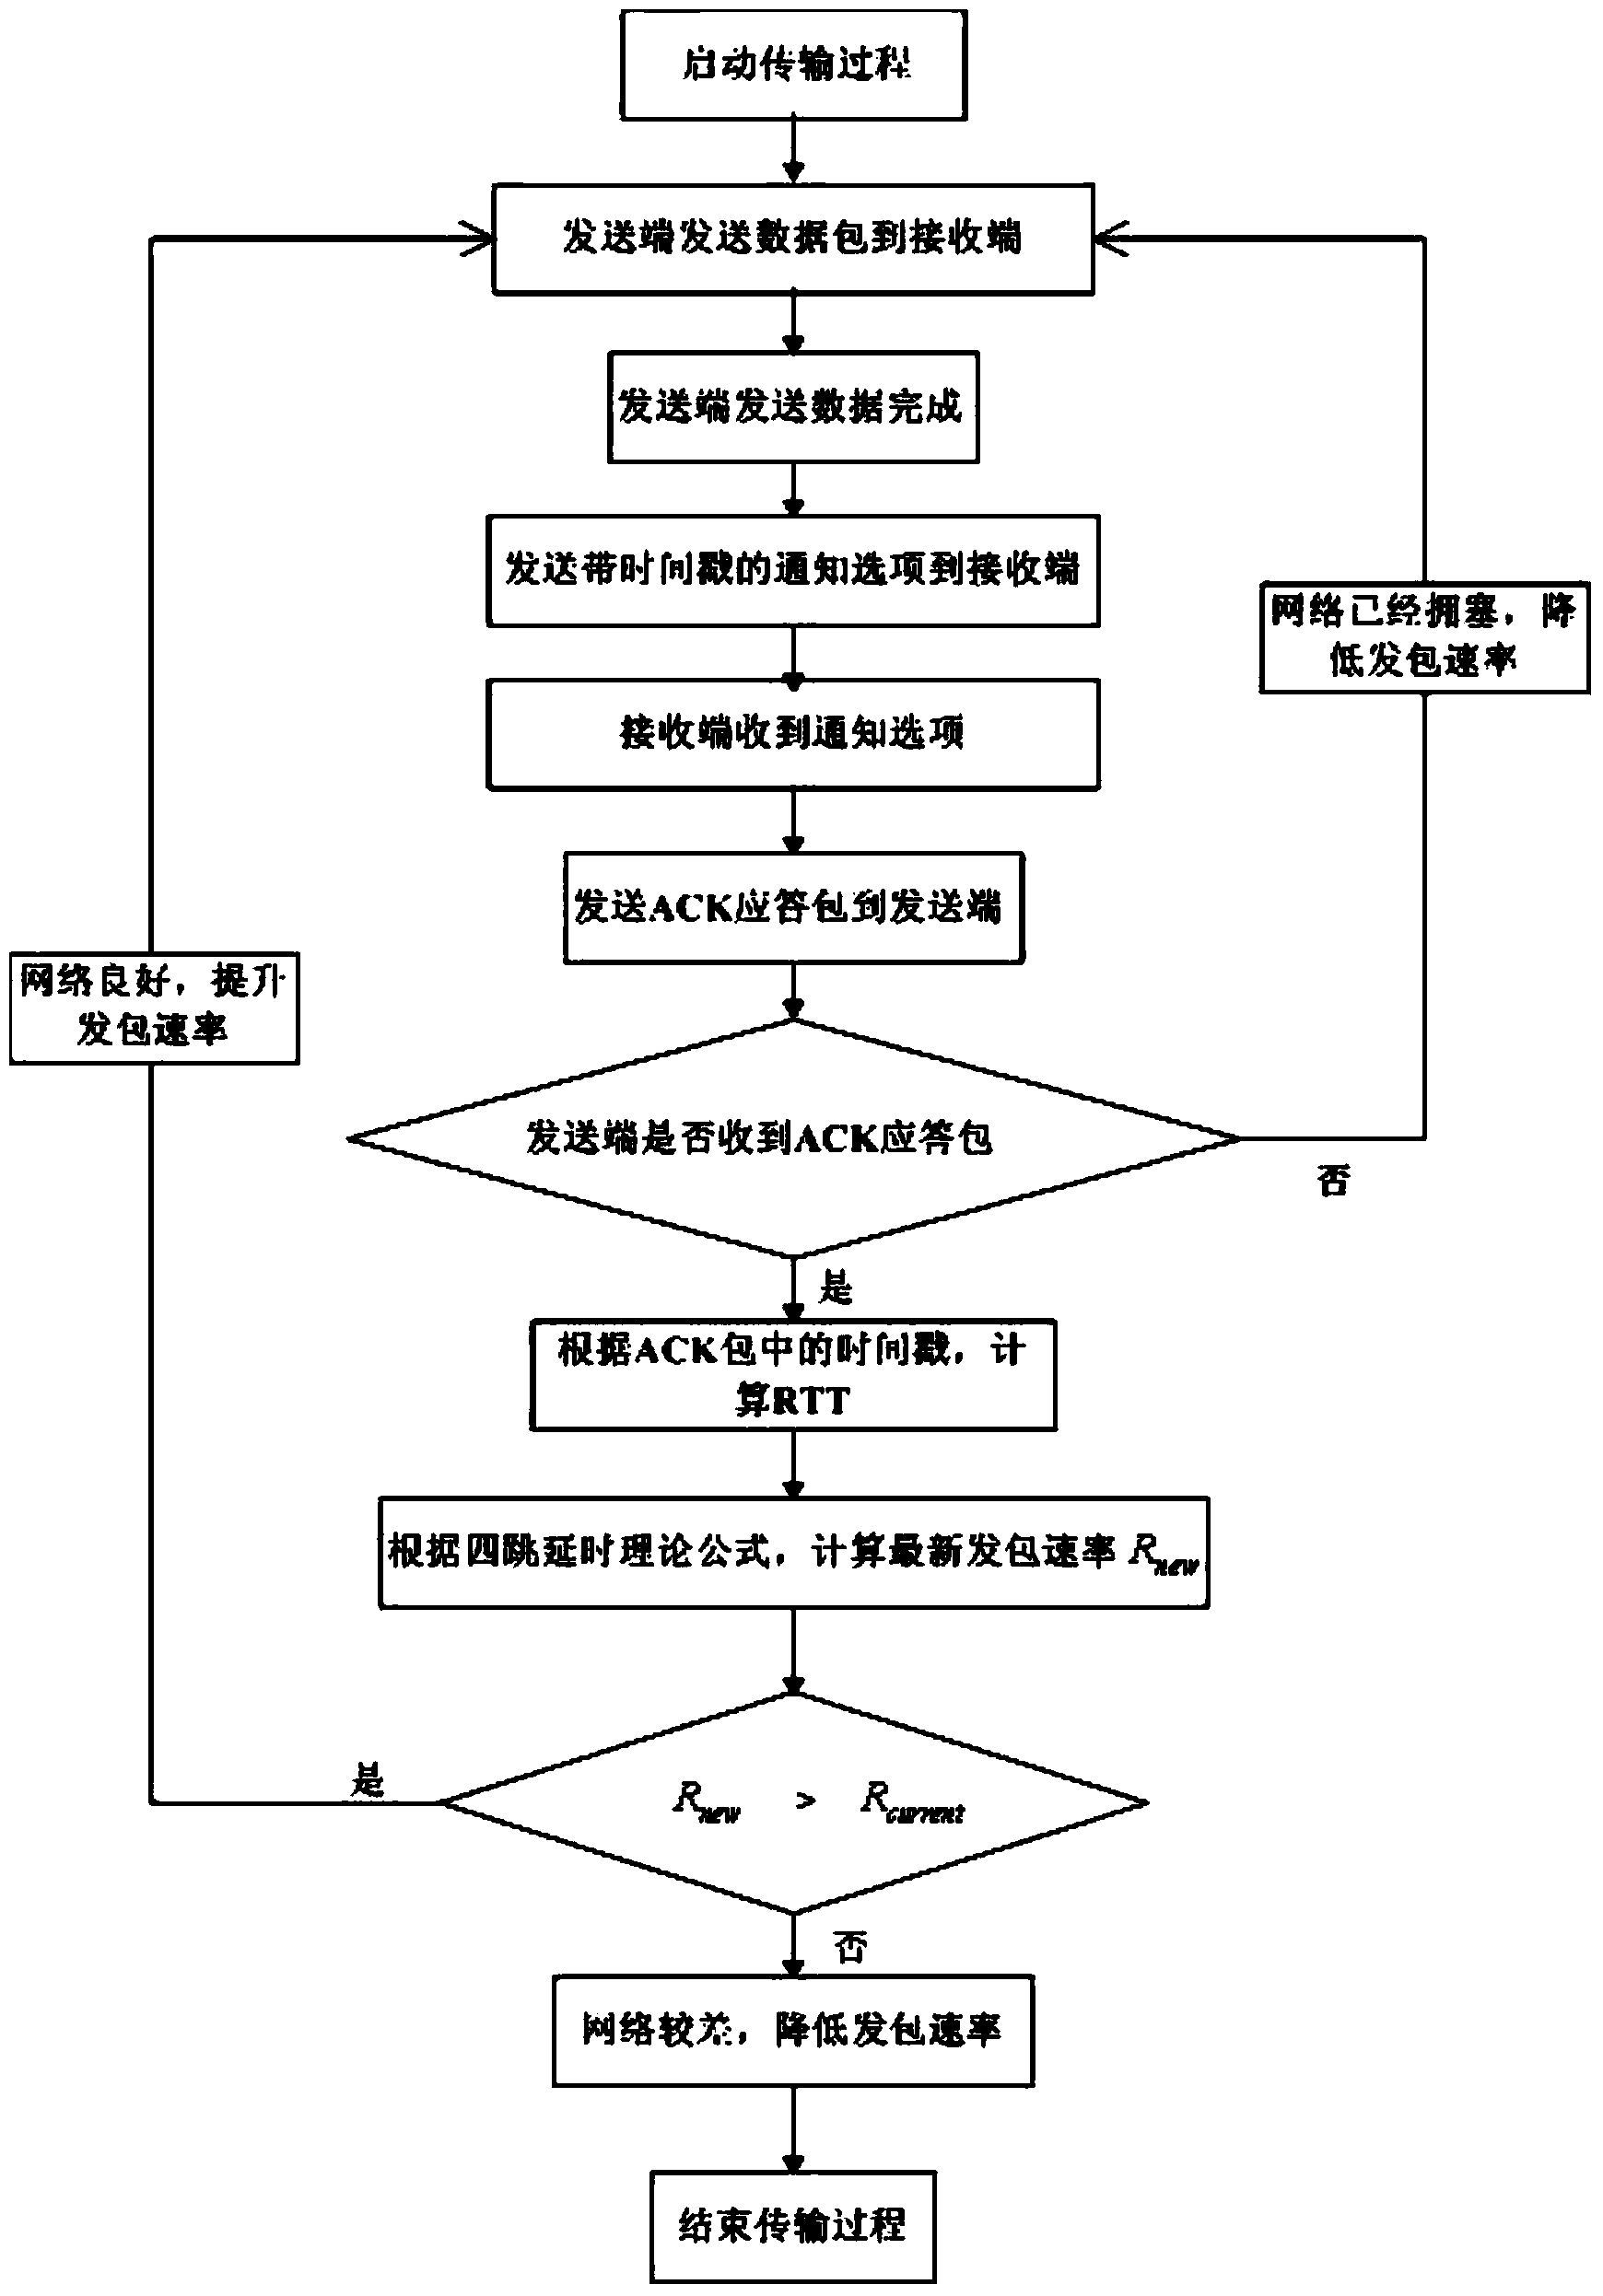 Wireless multi-hop network congestion control method and system based on RTT